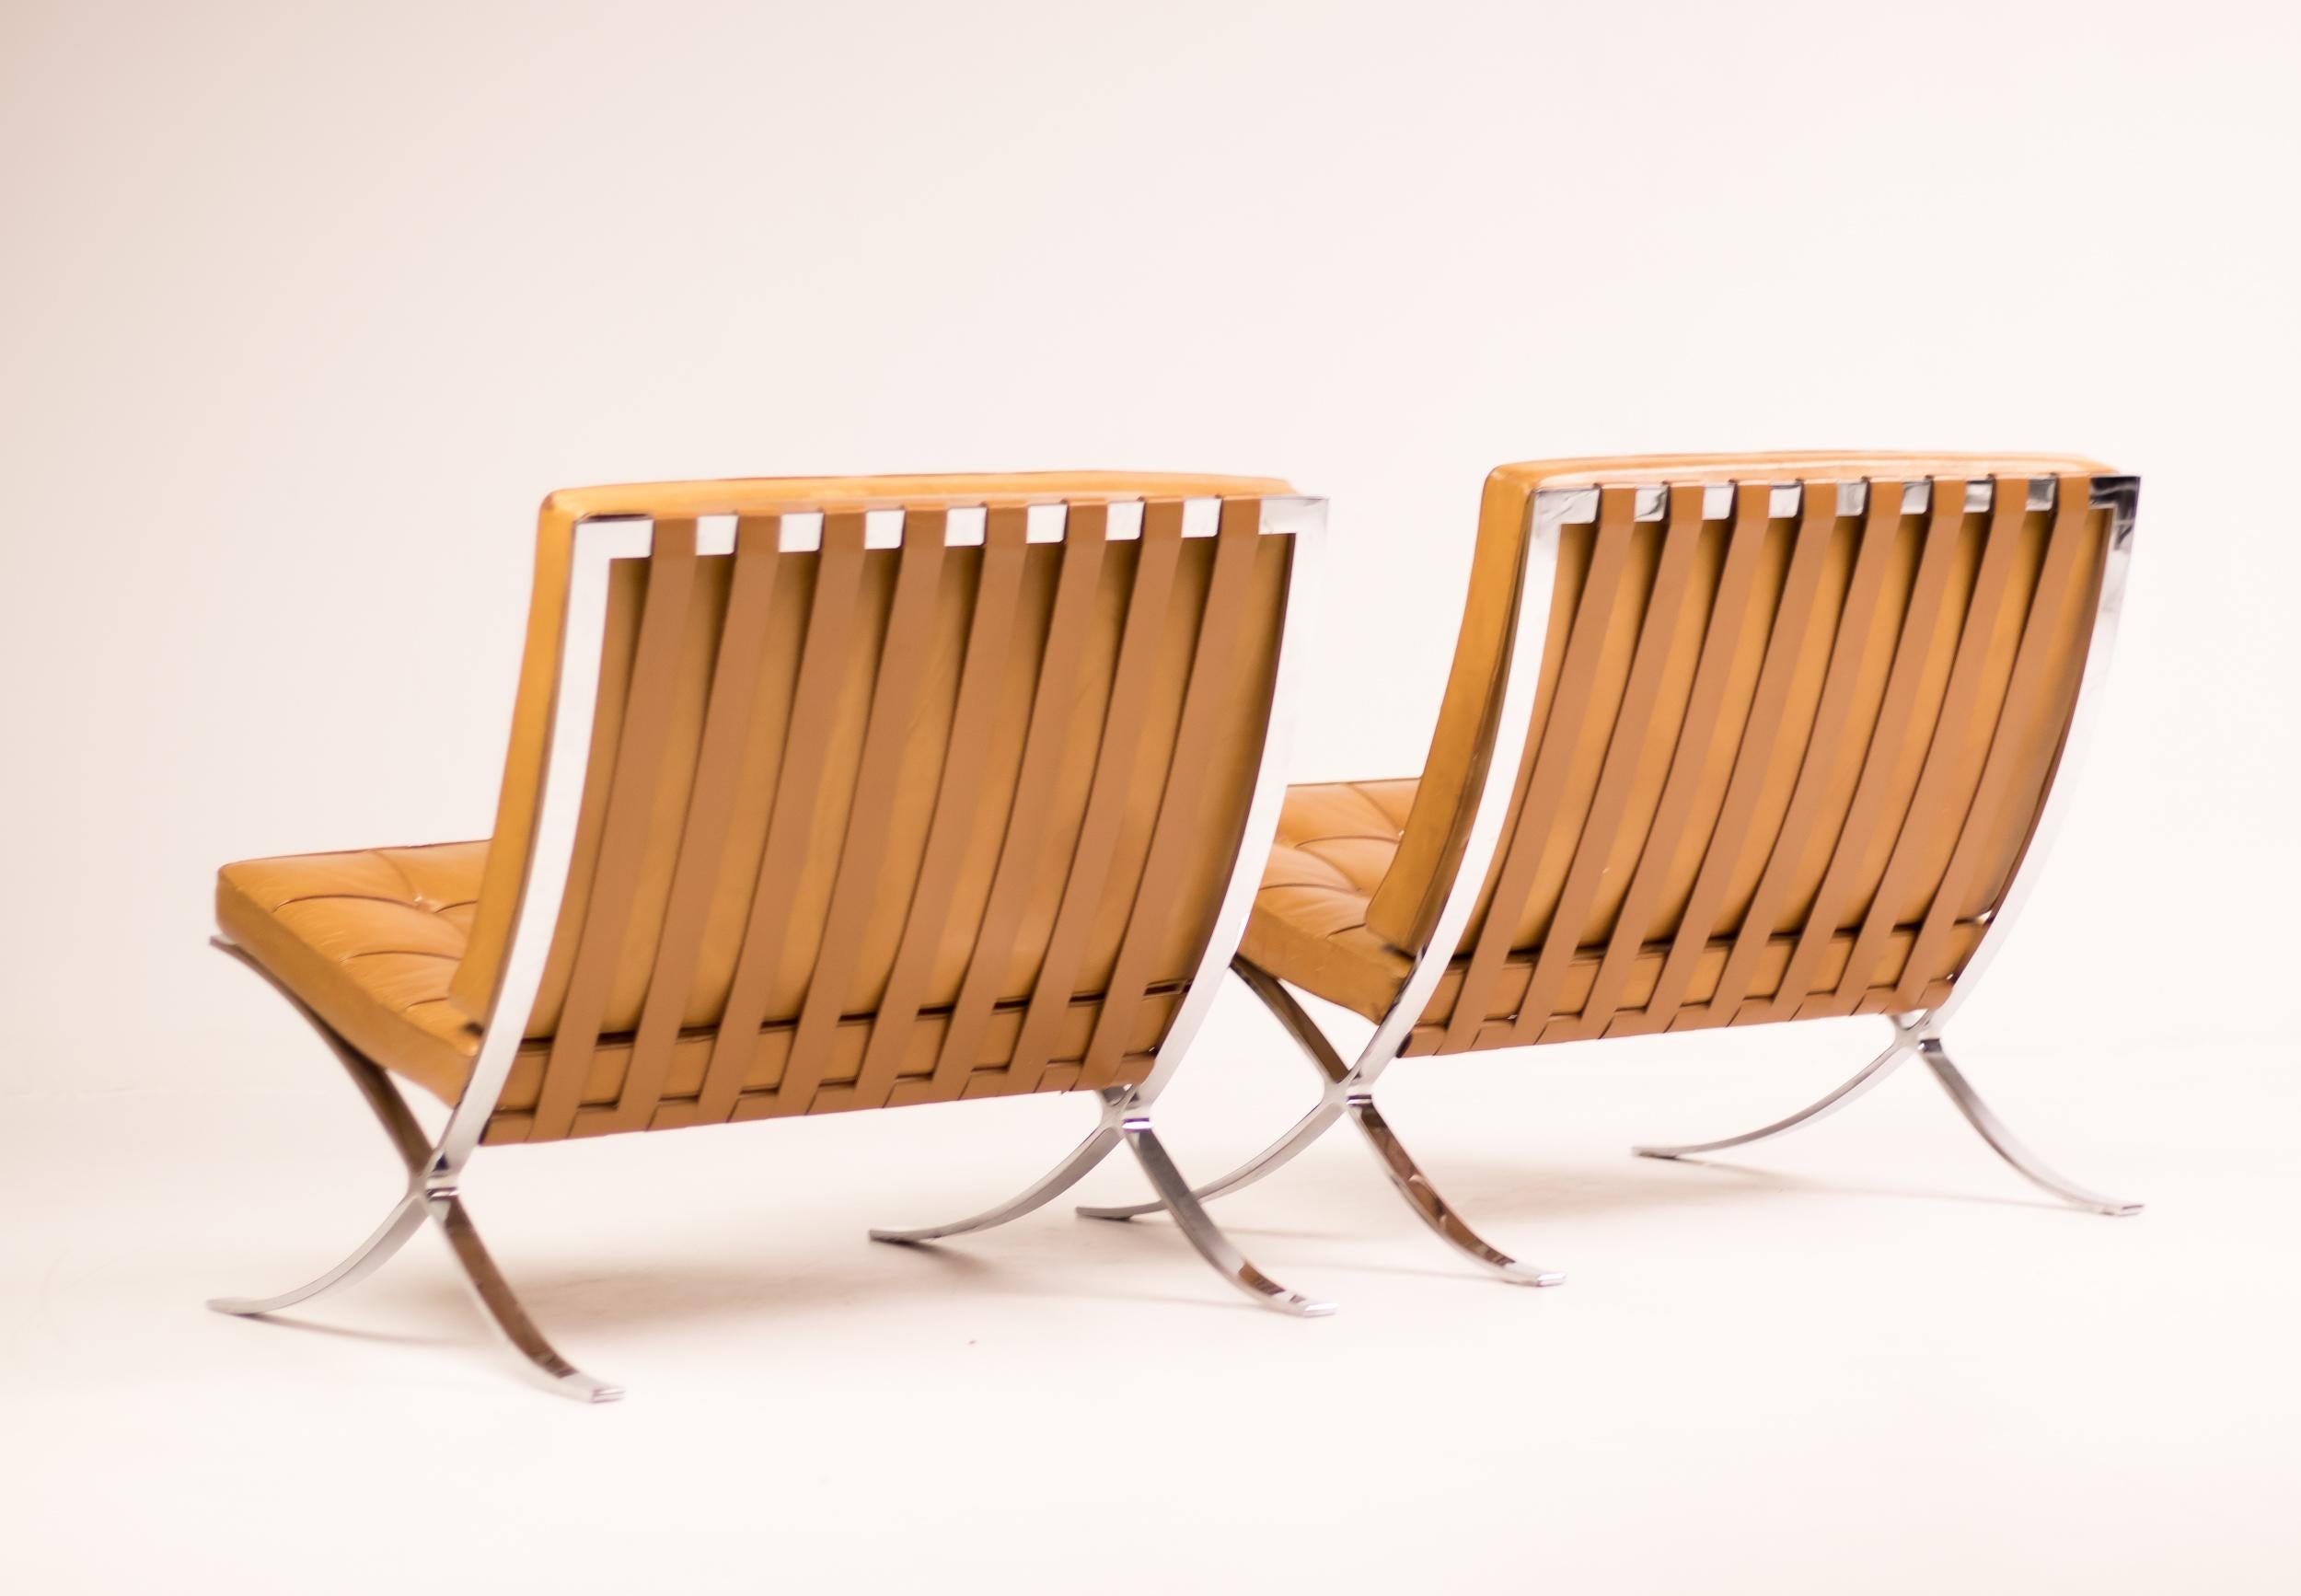 Pair Of Cognac Leather Barcelona Chairs By Mies Van Der Rohe For